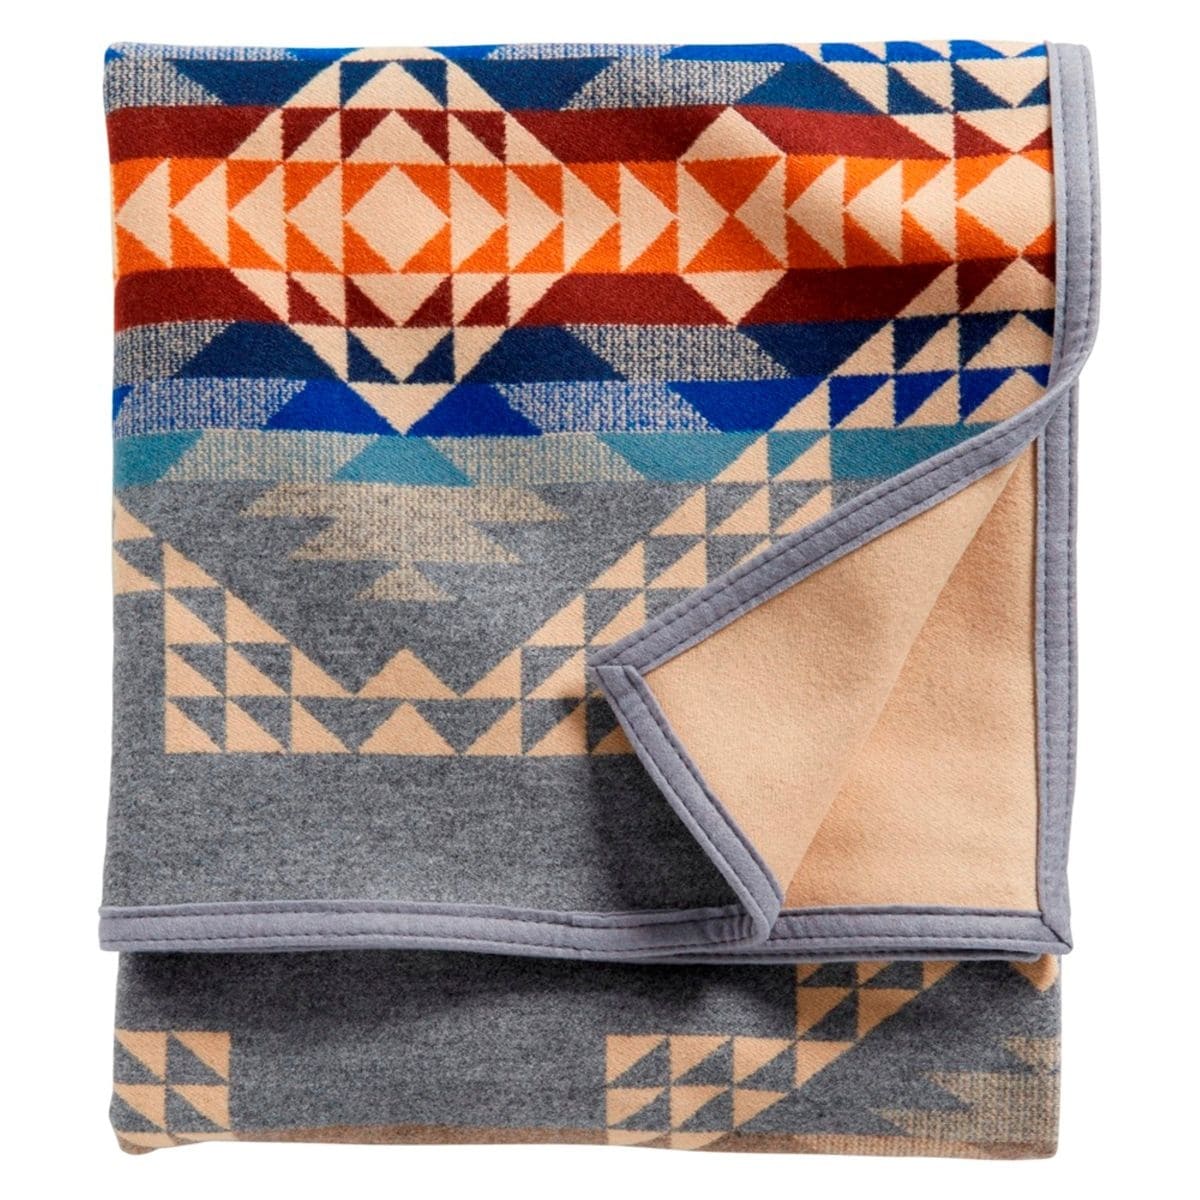 https://ak1.ostkcdn.com/images/products/is/images/direct/b0769d88f5a70c825d8510dd6a24a9975dd34187/Pendleton-Smith-Rock-King-Blanket.jpg